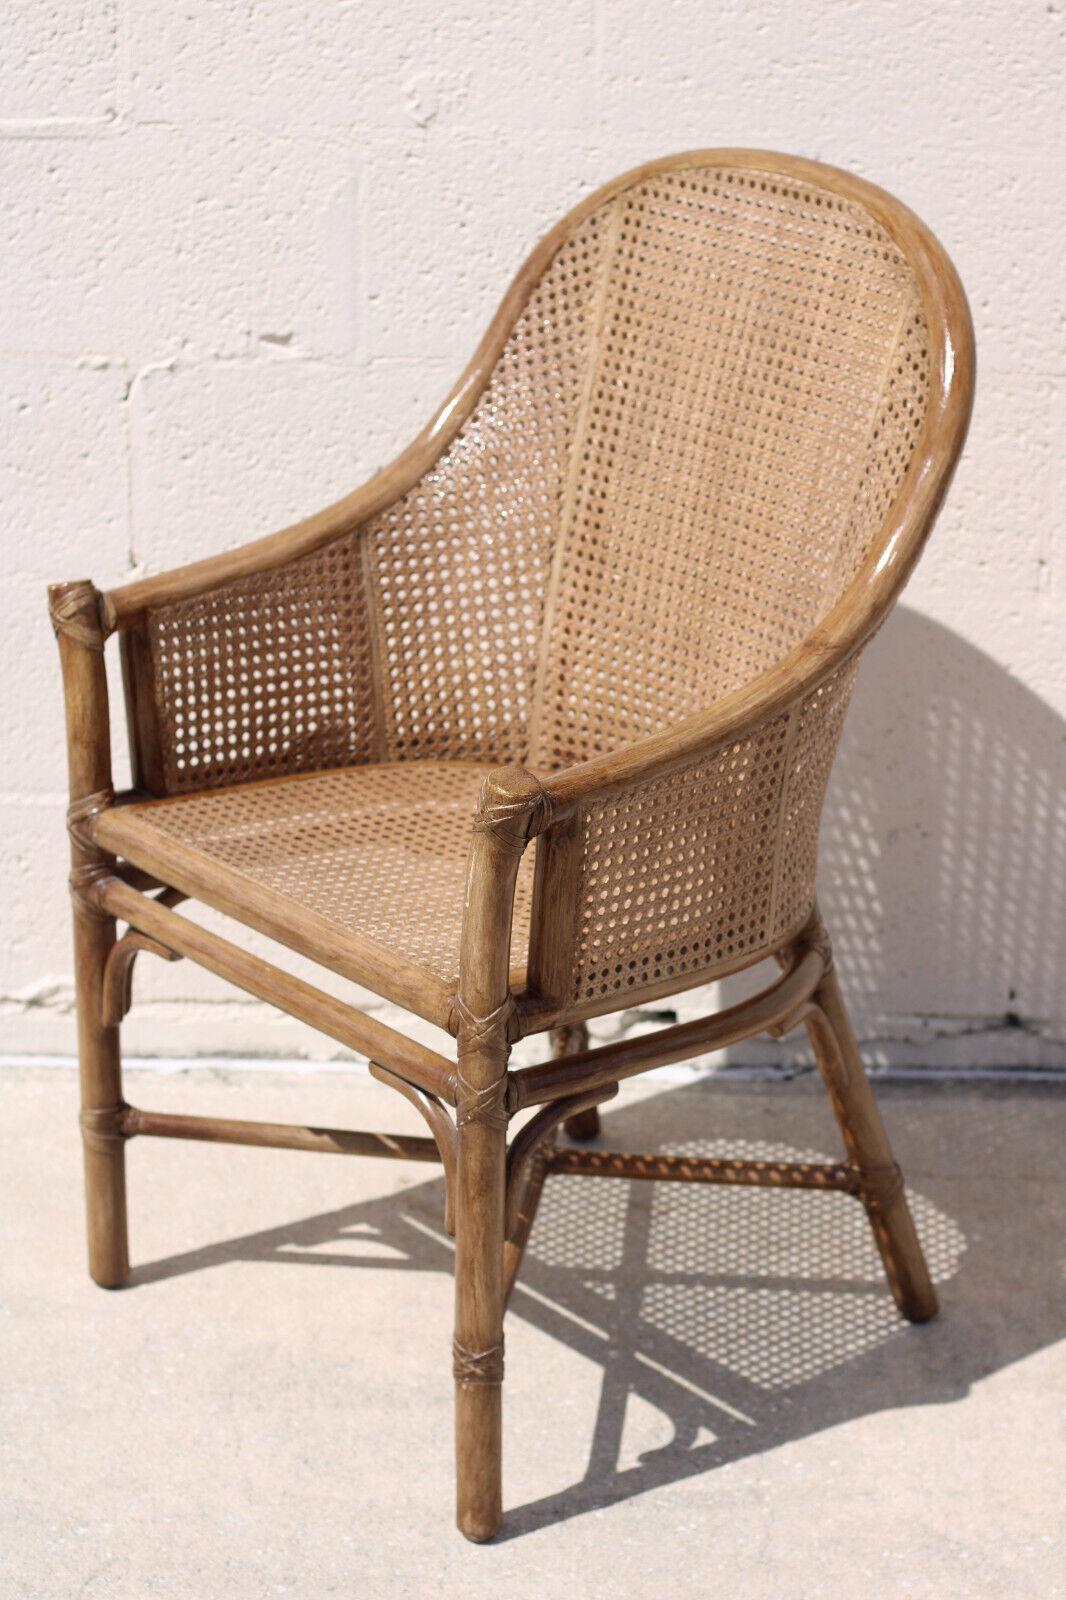 Organic Modern Elinor McGuire Rattan Caned Barrel Back Arm Chairs, a Pair For Sale